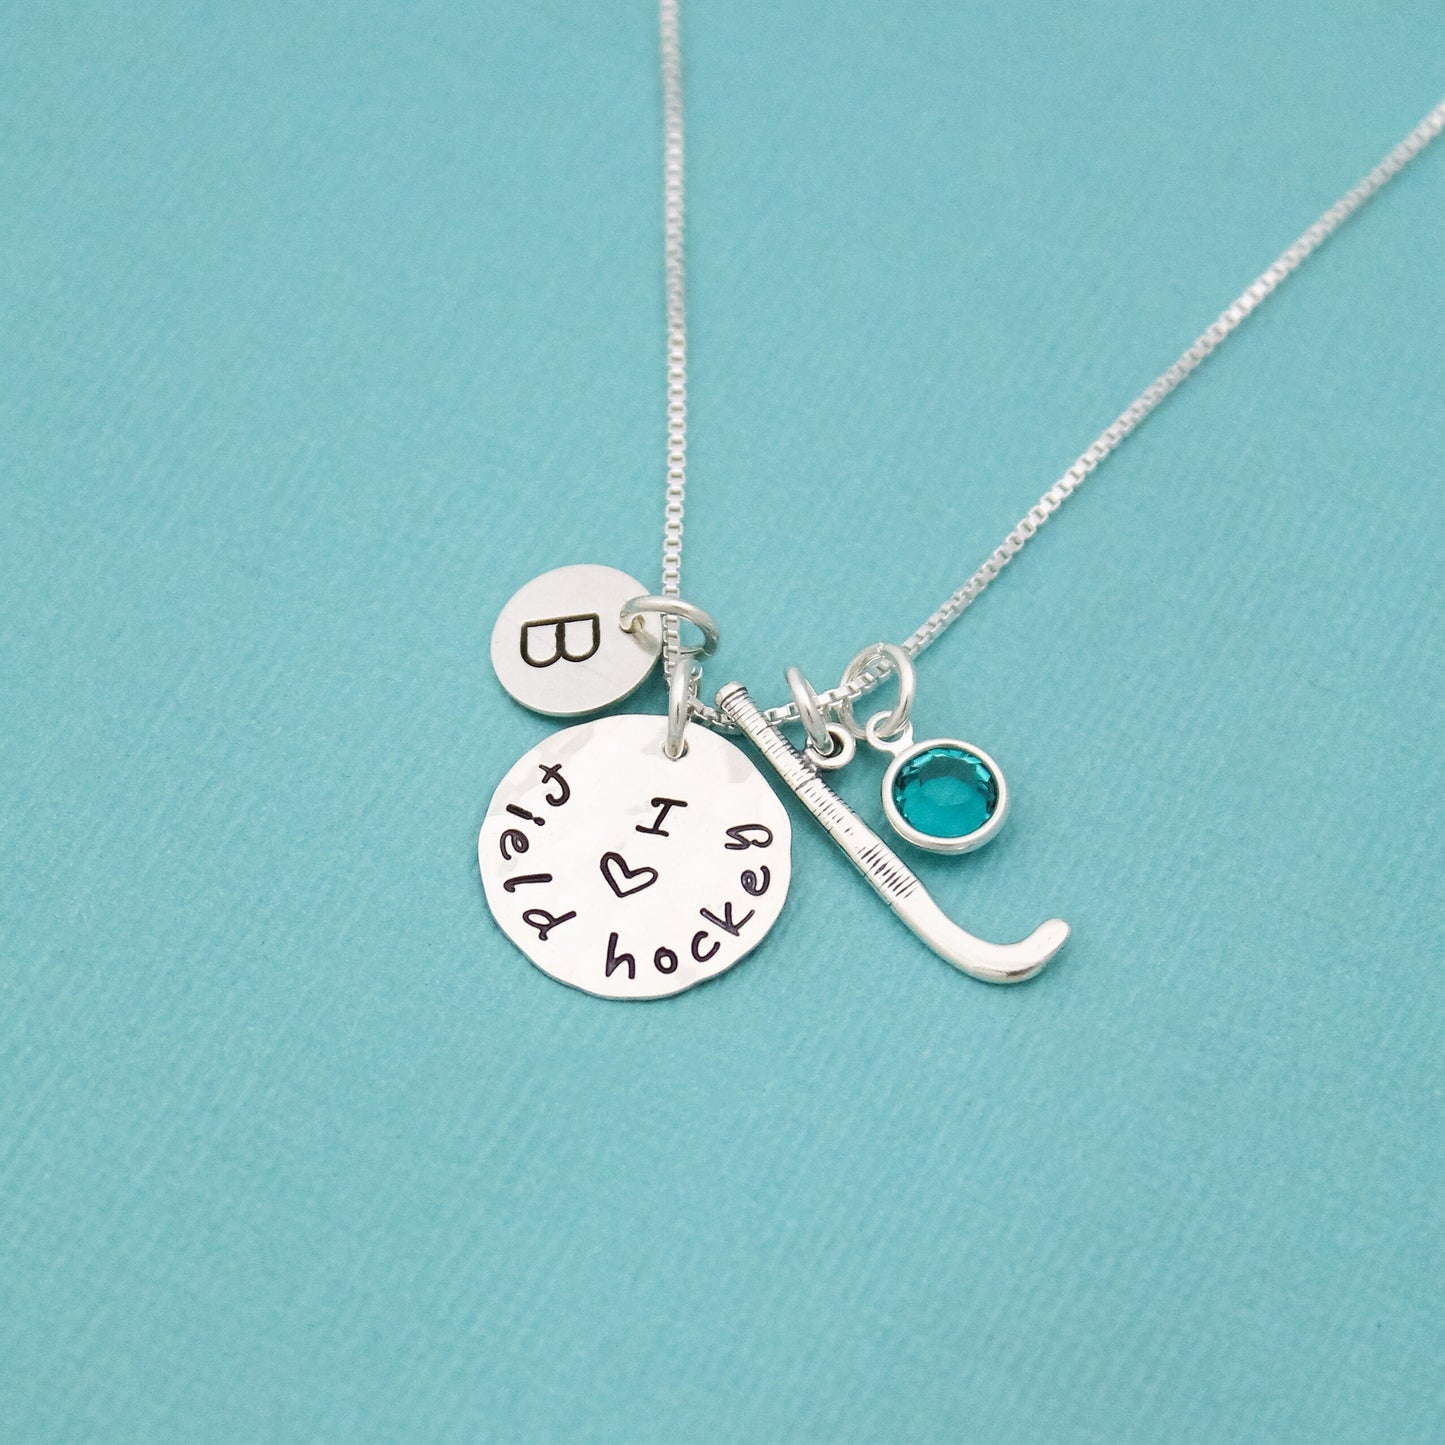 Field Hockey Necklace, Personalized Field Hockey Necklace, Field Hockey Team Jewelry, Field Hockey Gift, I Love Field Hockey Player Gift